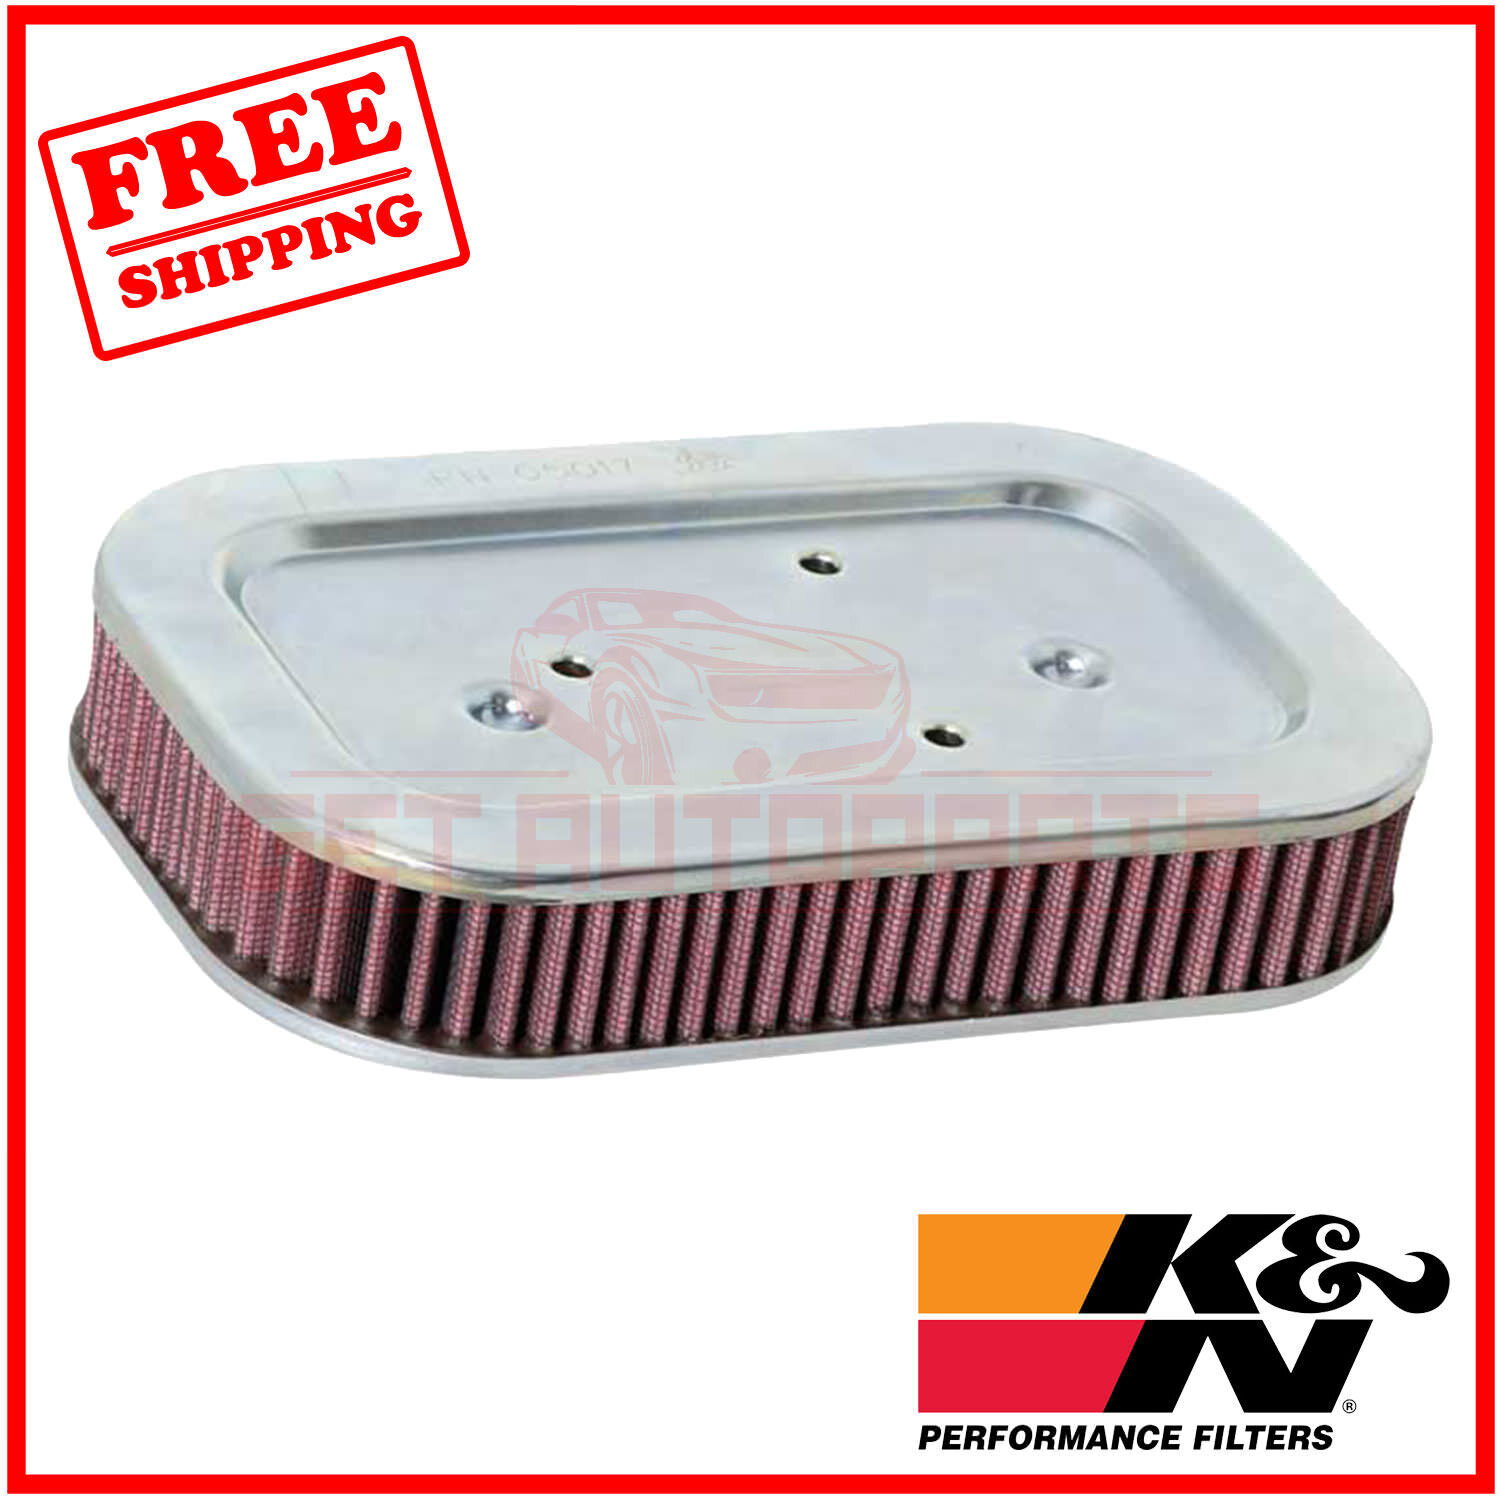 K&N Replacement Air Filter for Harley Davidson XL1200C Sportster 1200 2004-2013